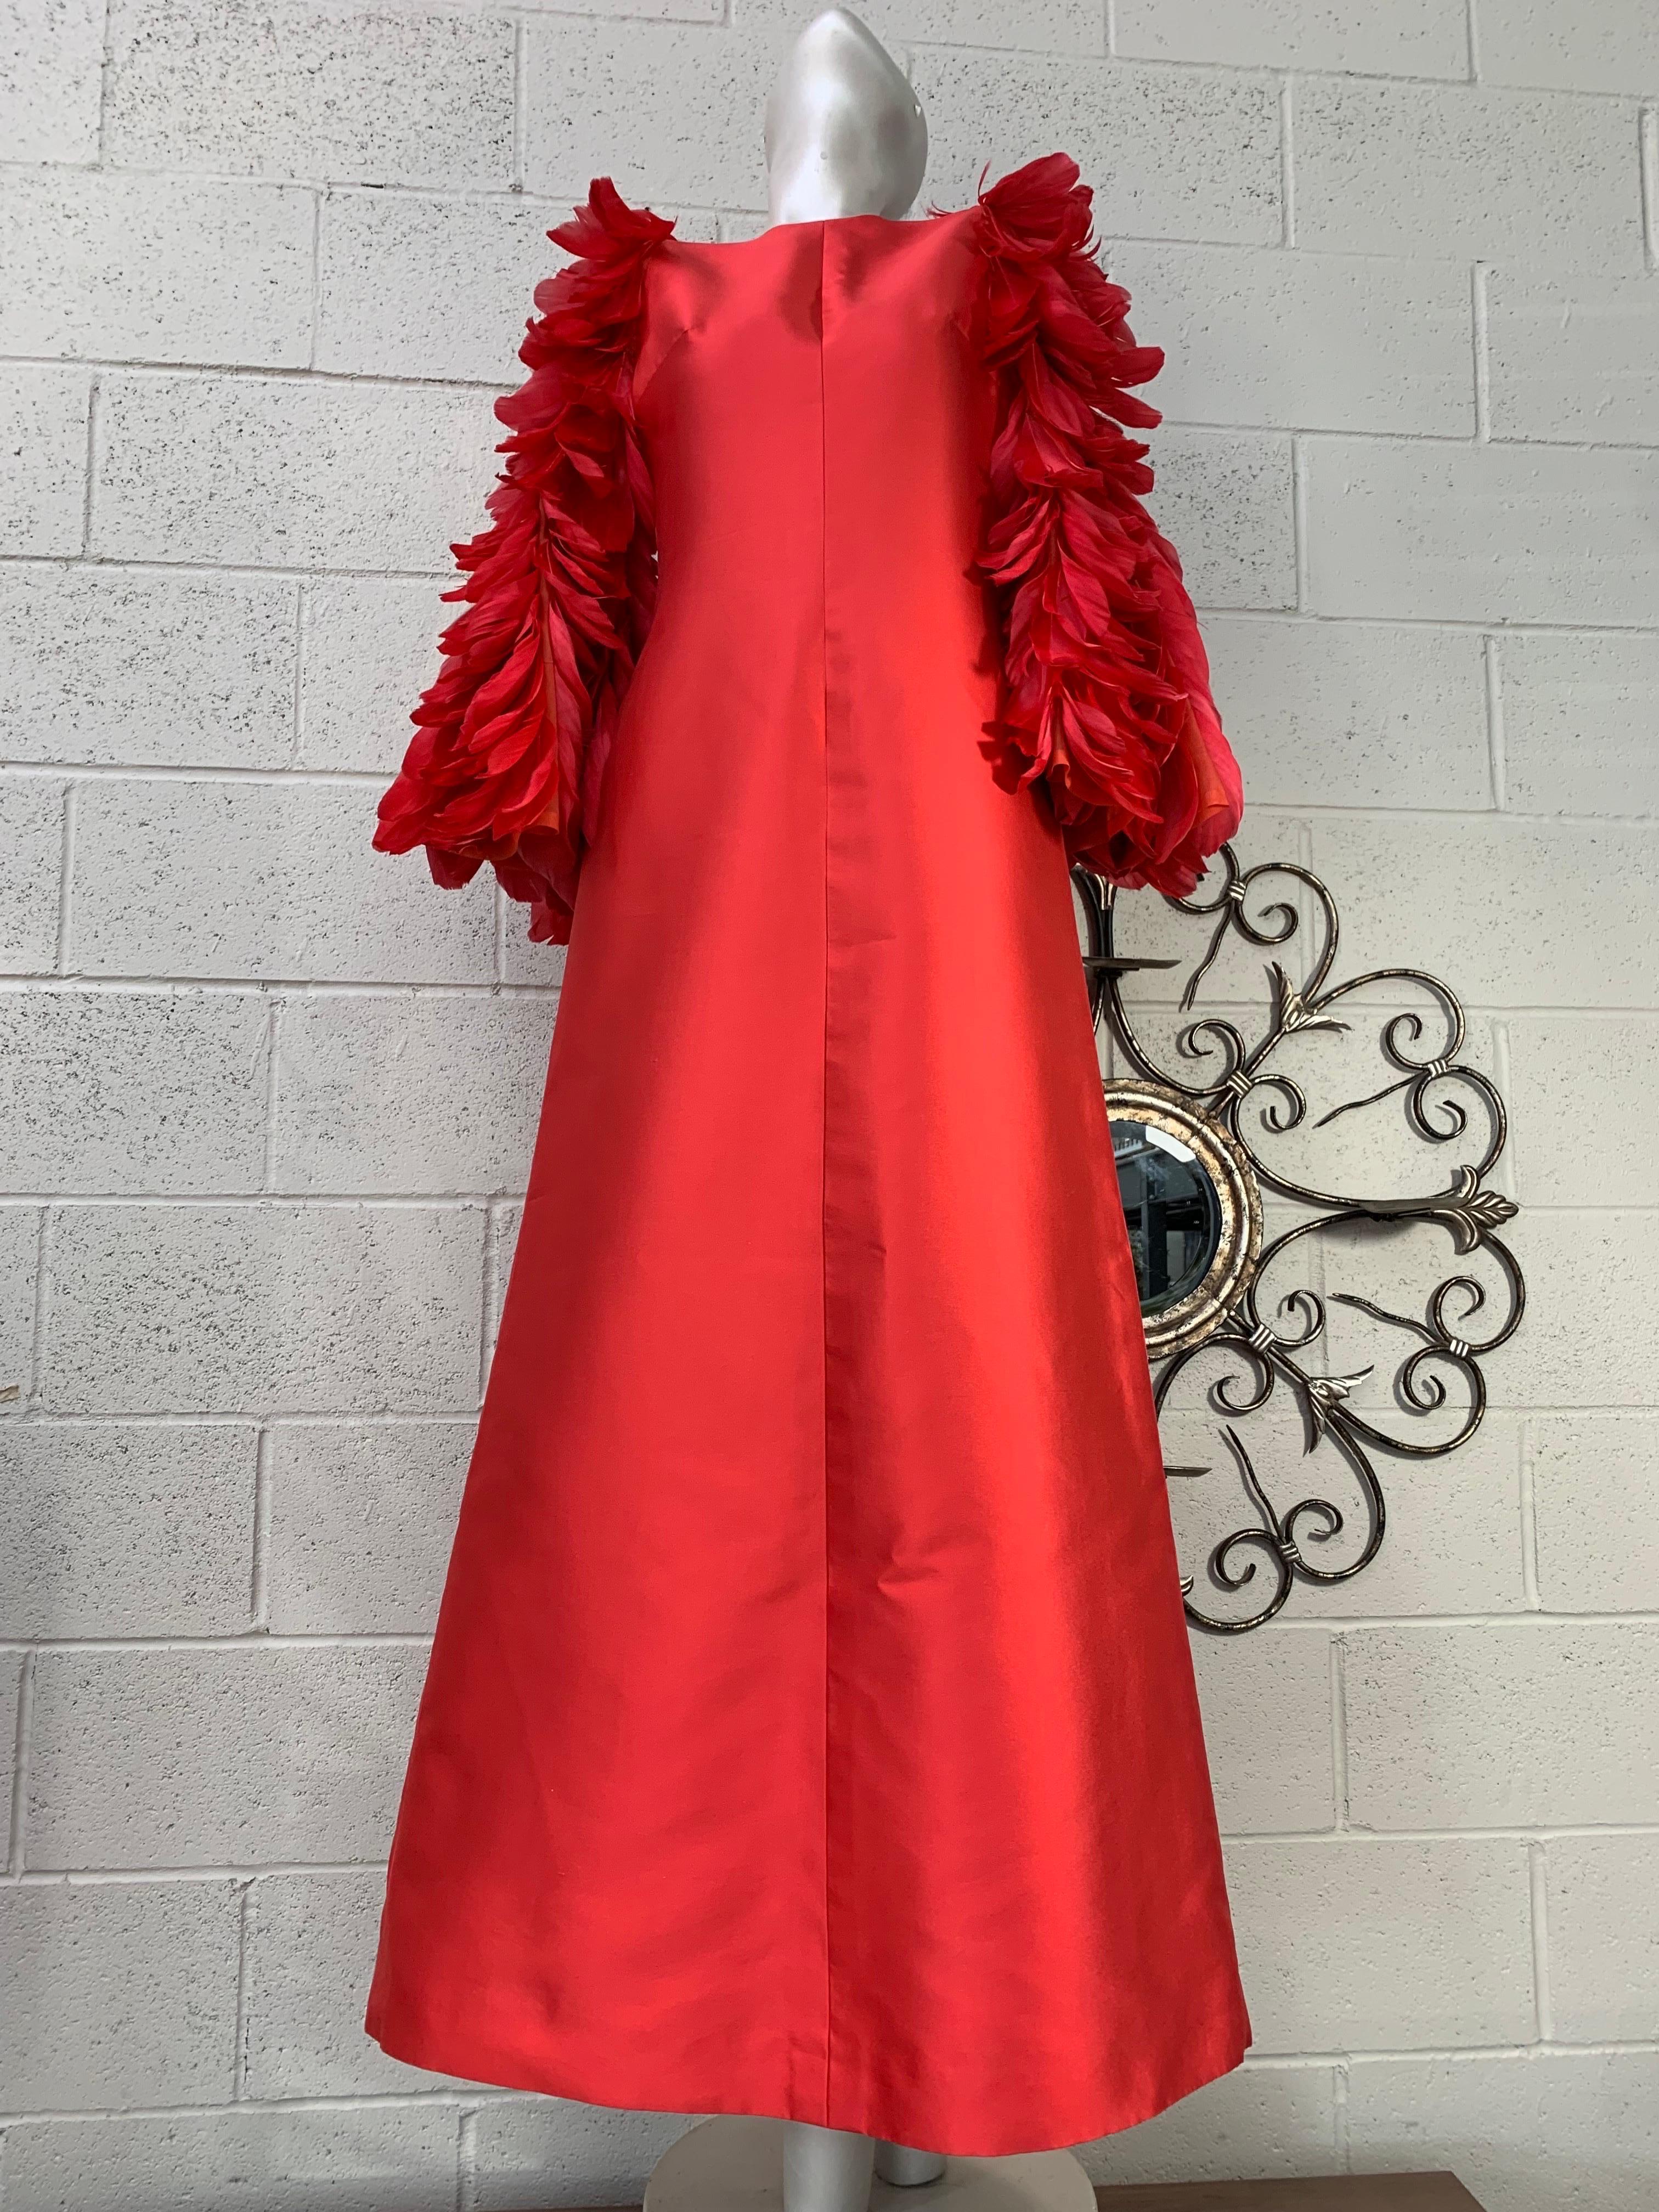 1960 Joui Schiesser Haute Couture Red Silk Gazar Gown w Feathered Bell Sleeves. A-line silhouette with rounded neckline and luxurious feather applique sleeves. Sleeves are an organza base providing movement. Back zipper closure. Fully lined. US size